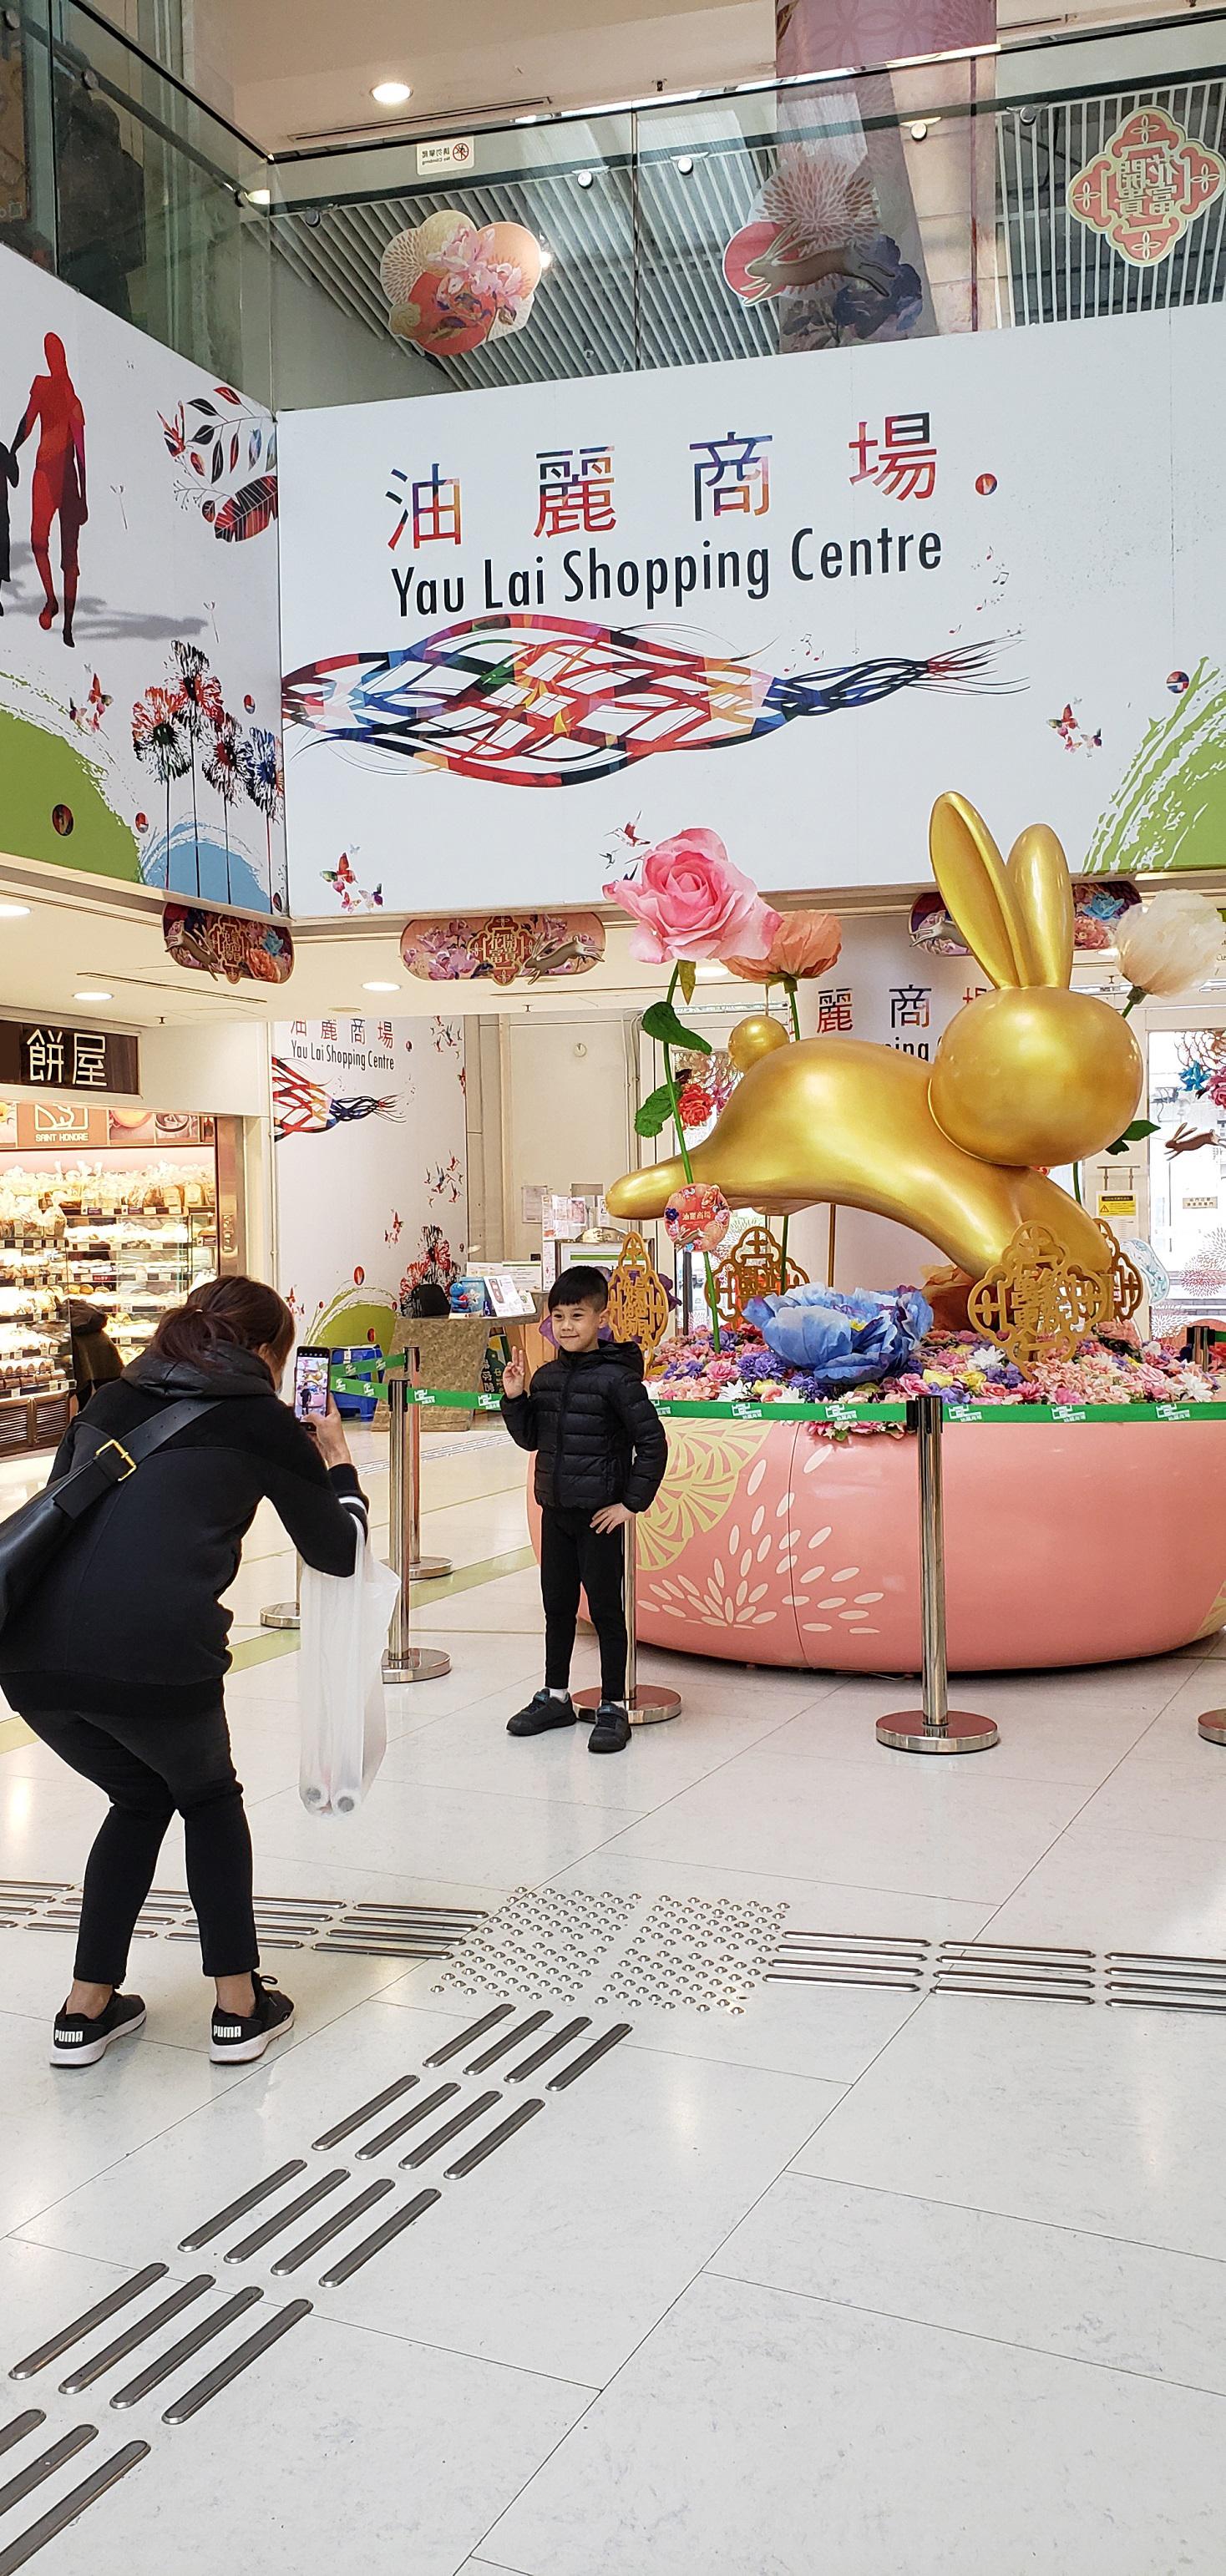 The Hong Kong Housing Authority has put up festive new year decorations at Yau Lai Shopping Centre, Yau Tong, to bring customers and members of the public good vibes for the Lunar New Year as well as provide them with photo-shooting spots.